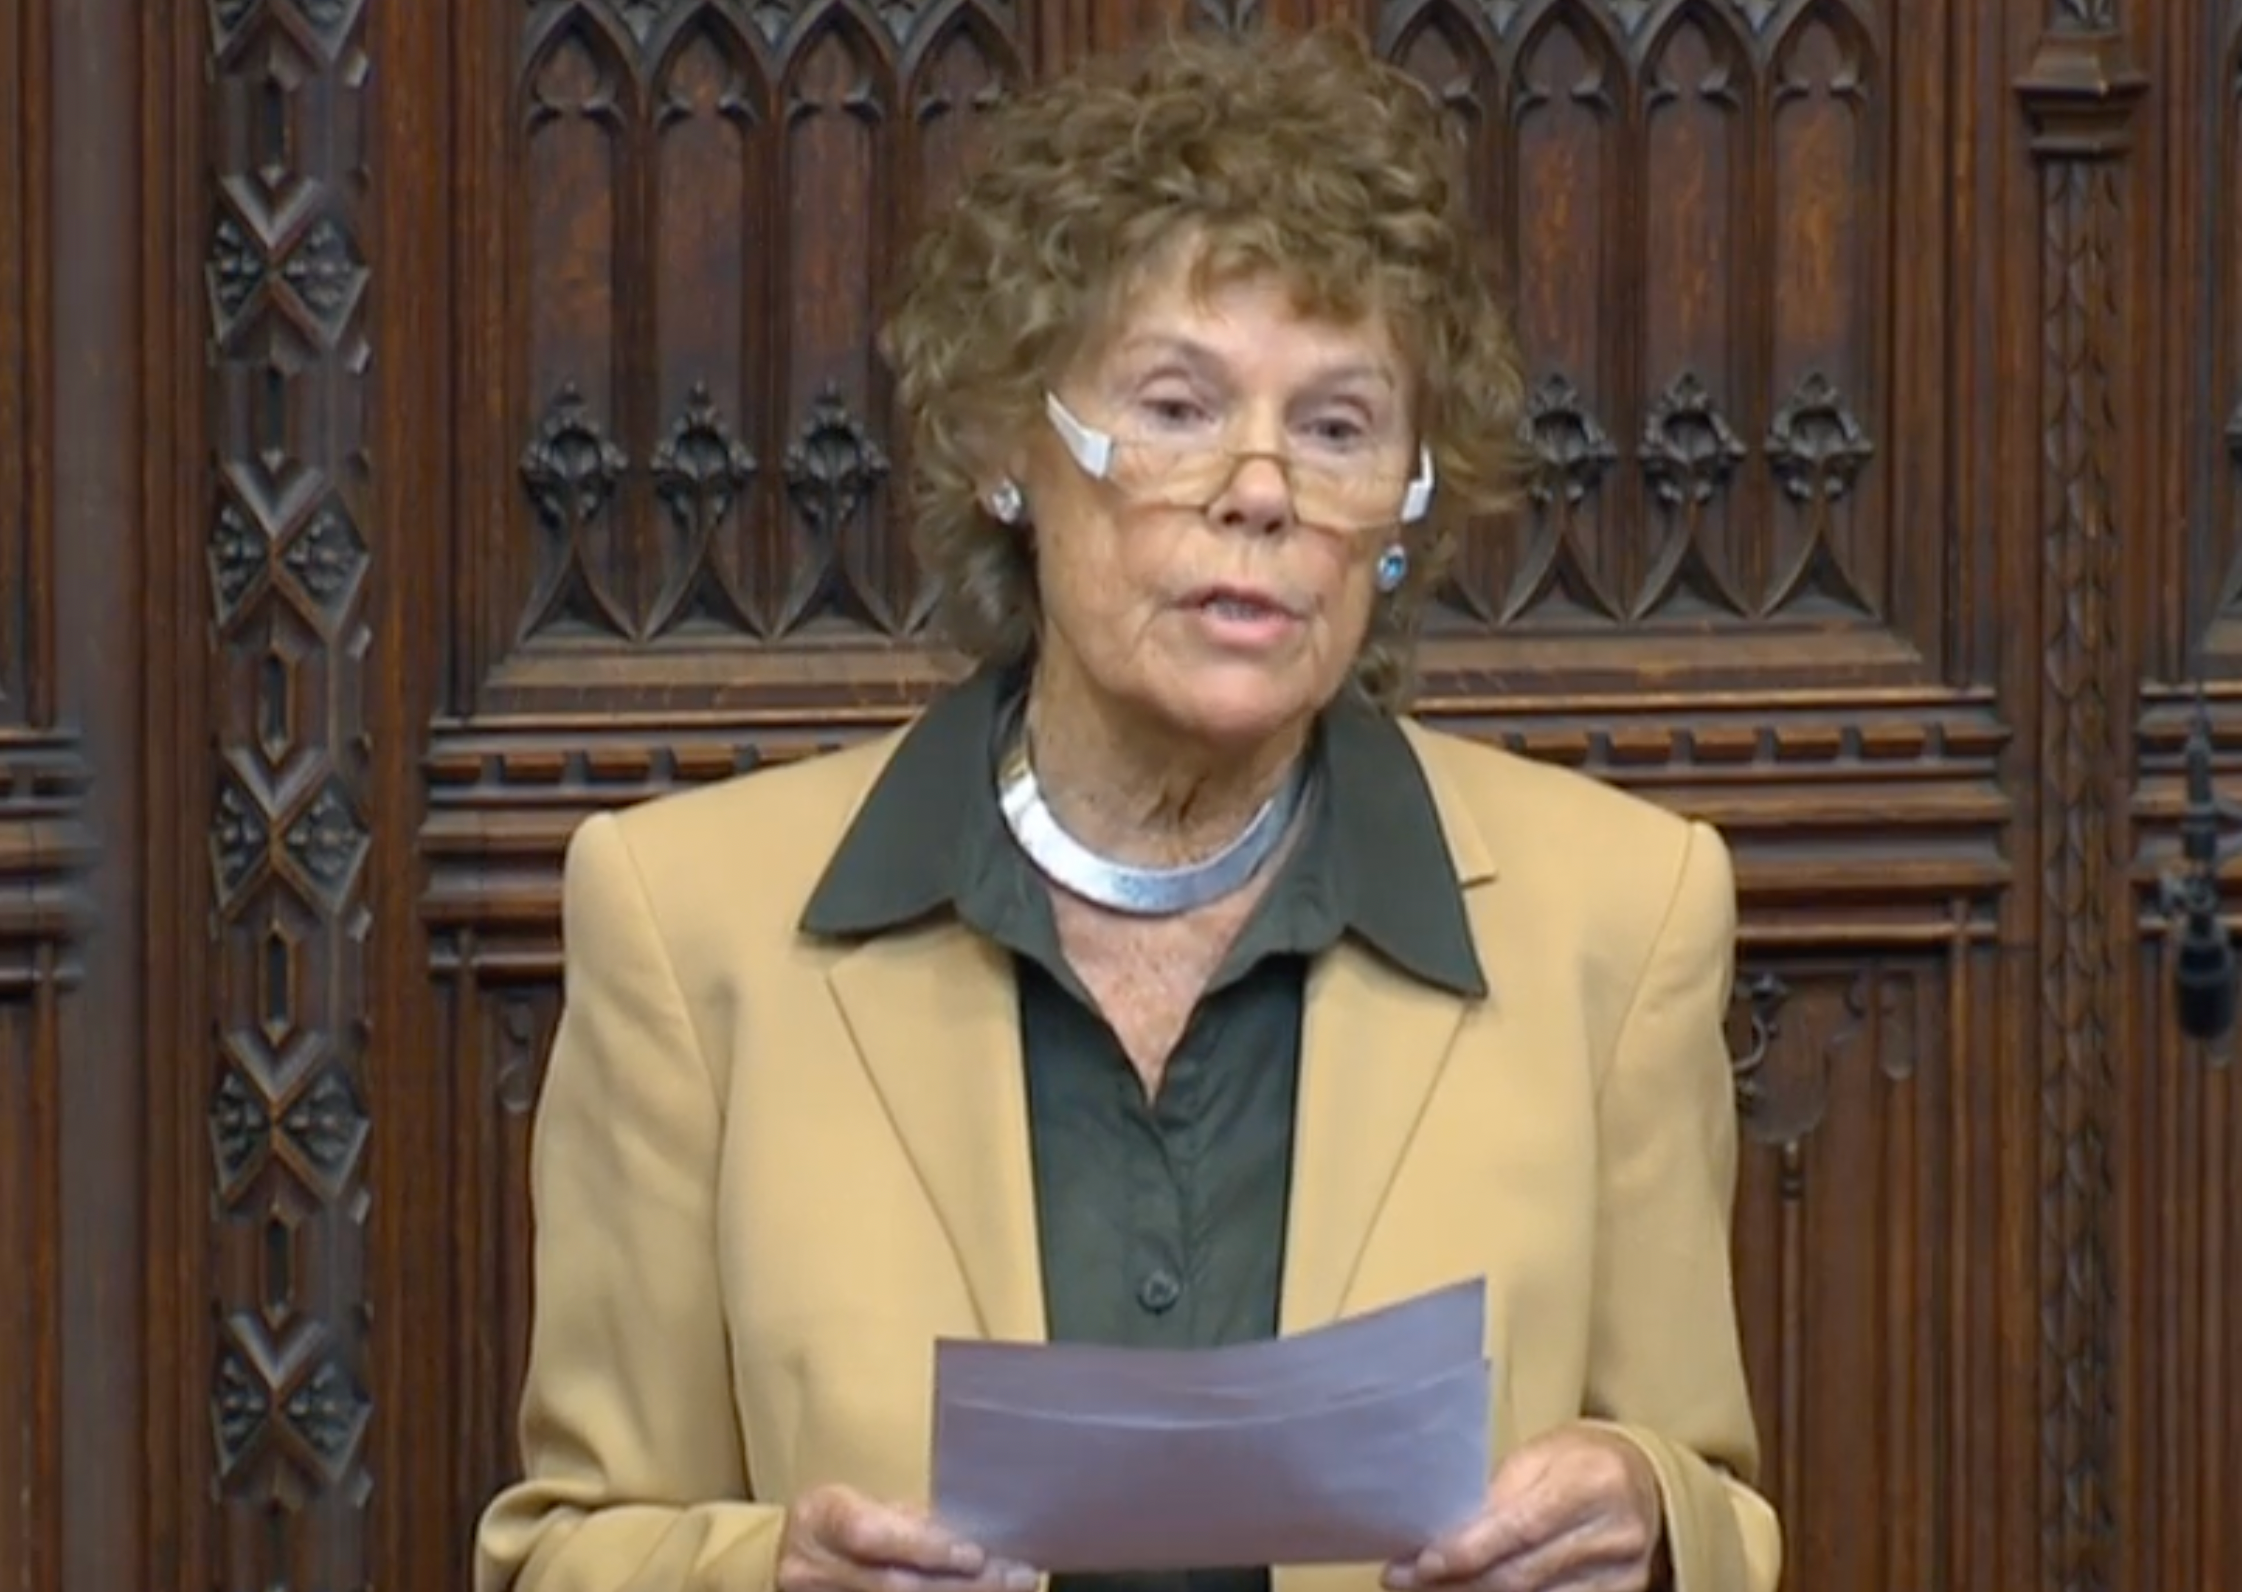 Baroness Kate Hoey sits as a non-affiliated peer